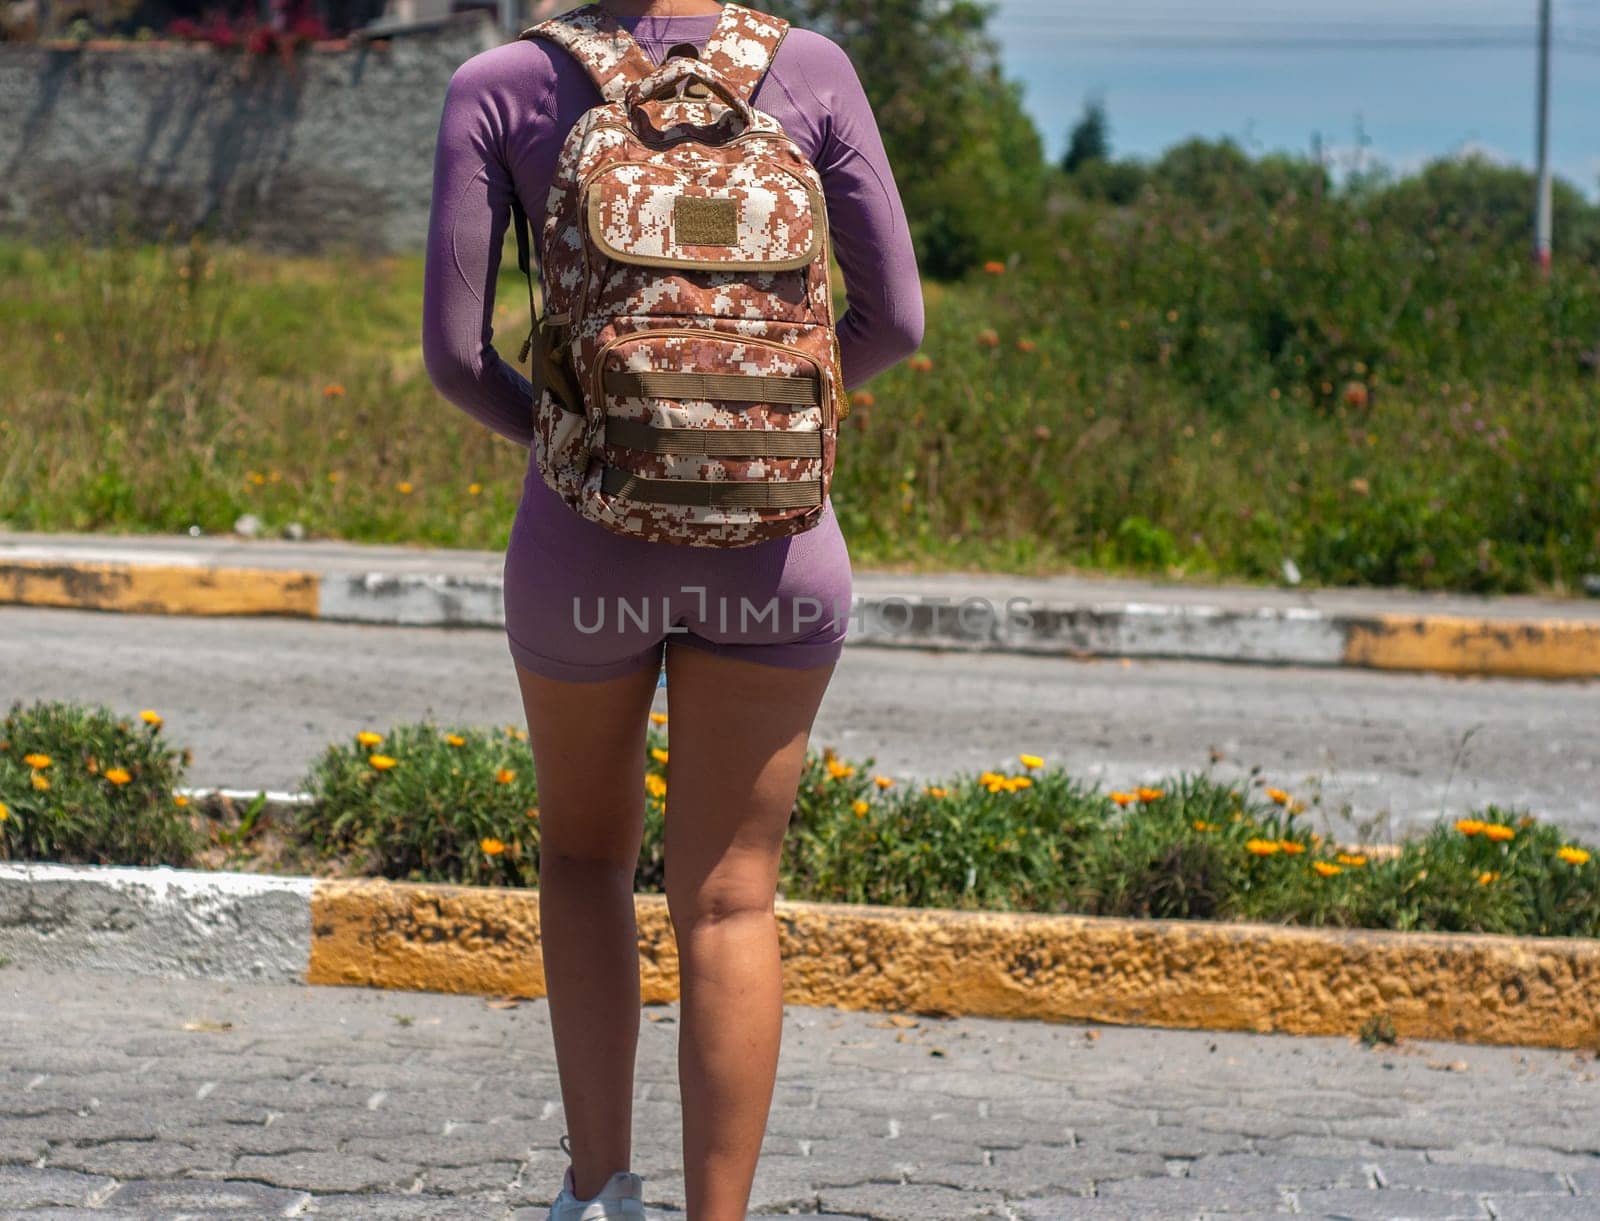 Woman With Backpack Standing by the Roadside on a Sunny Day